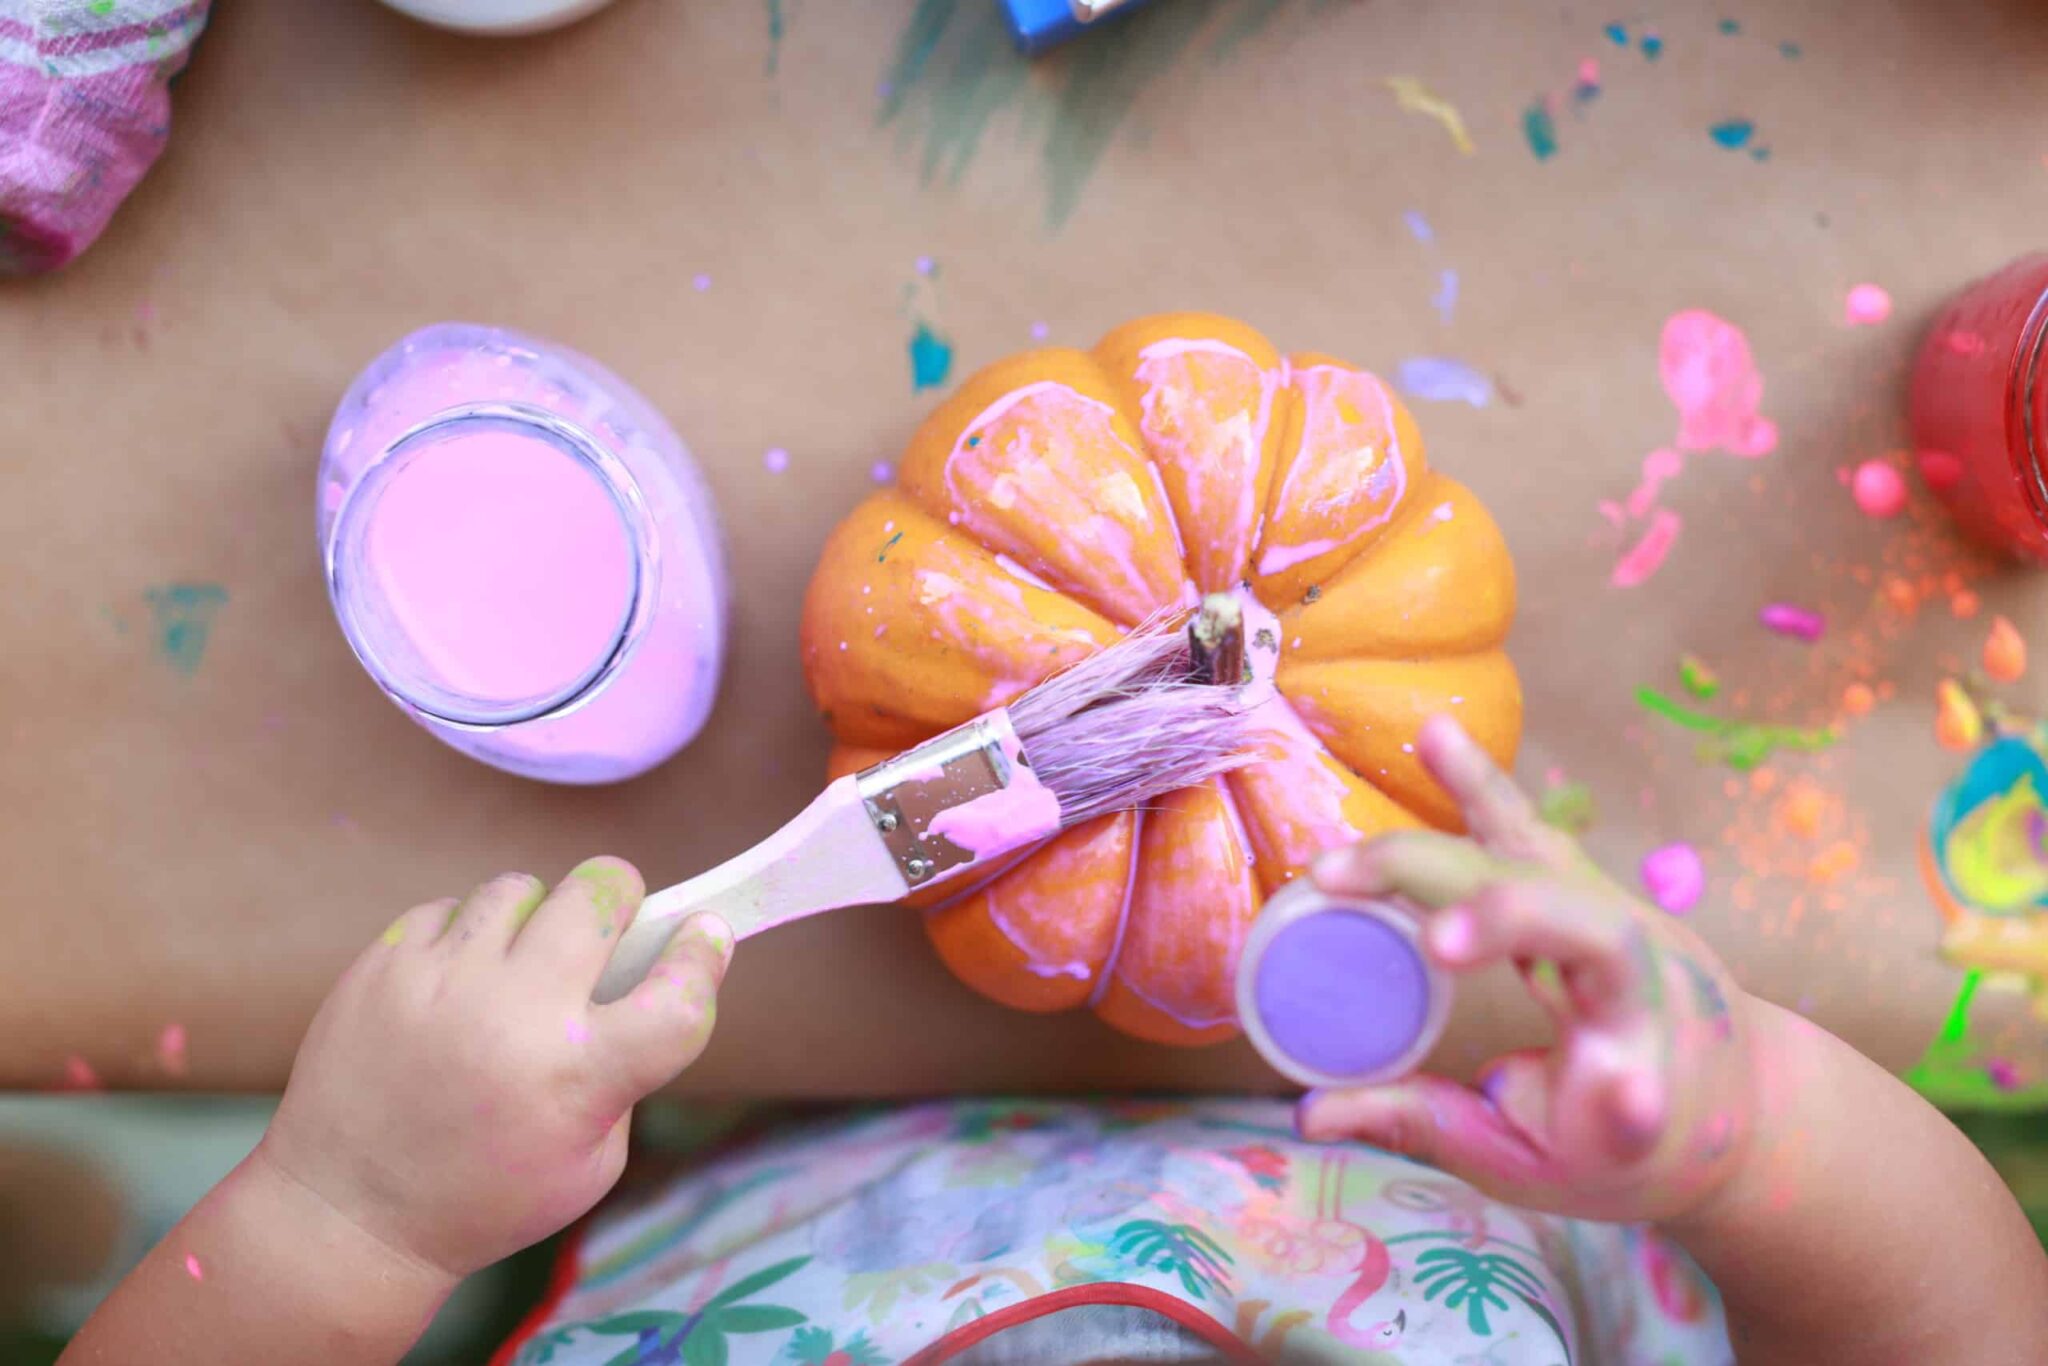 The BEST Halloween Arts and Crafts for Toddlers